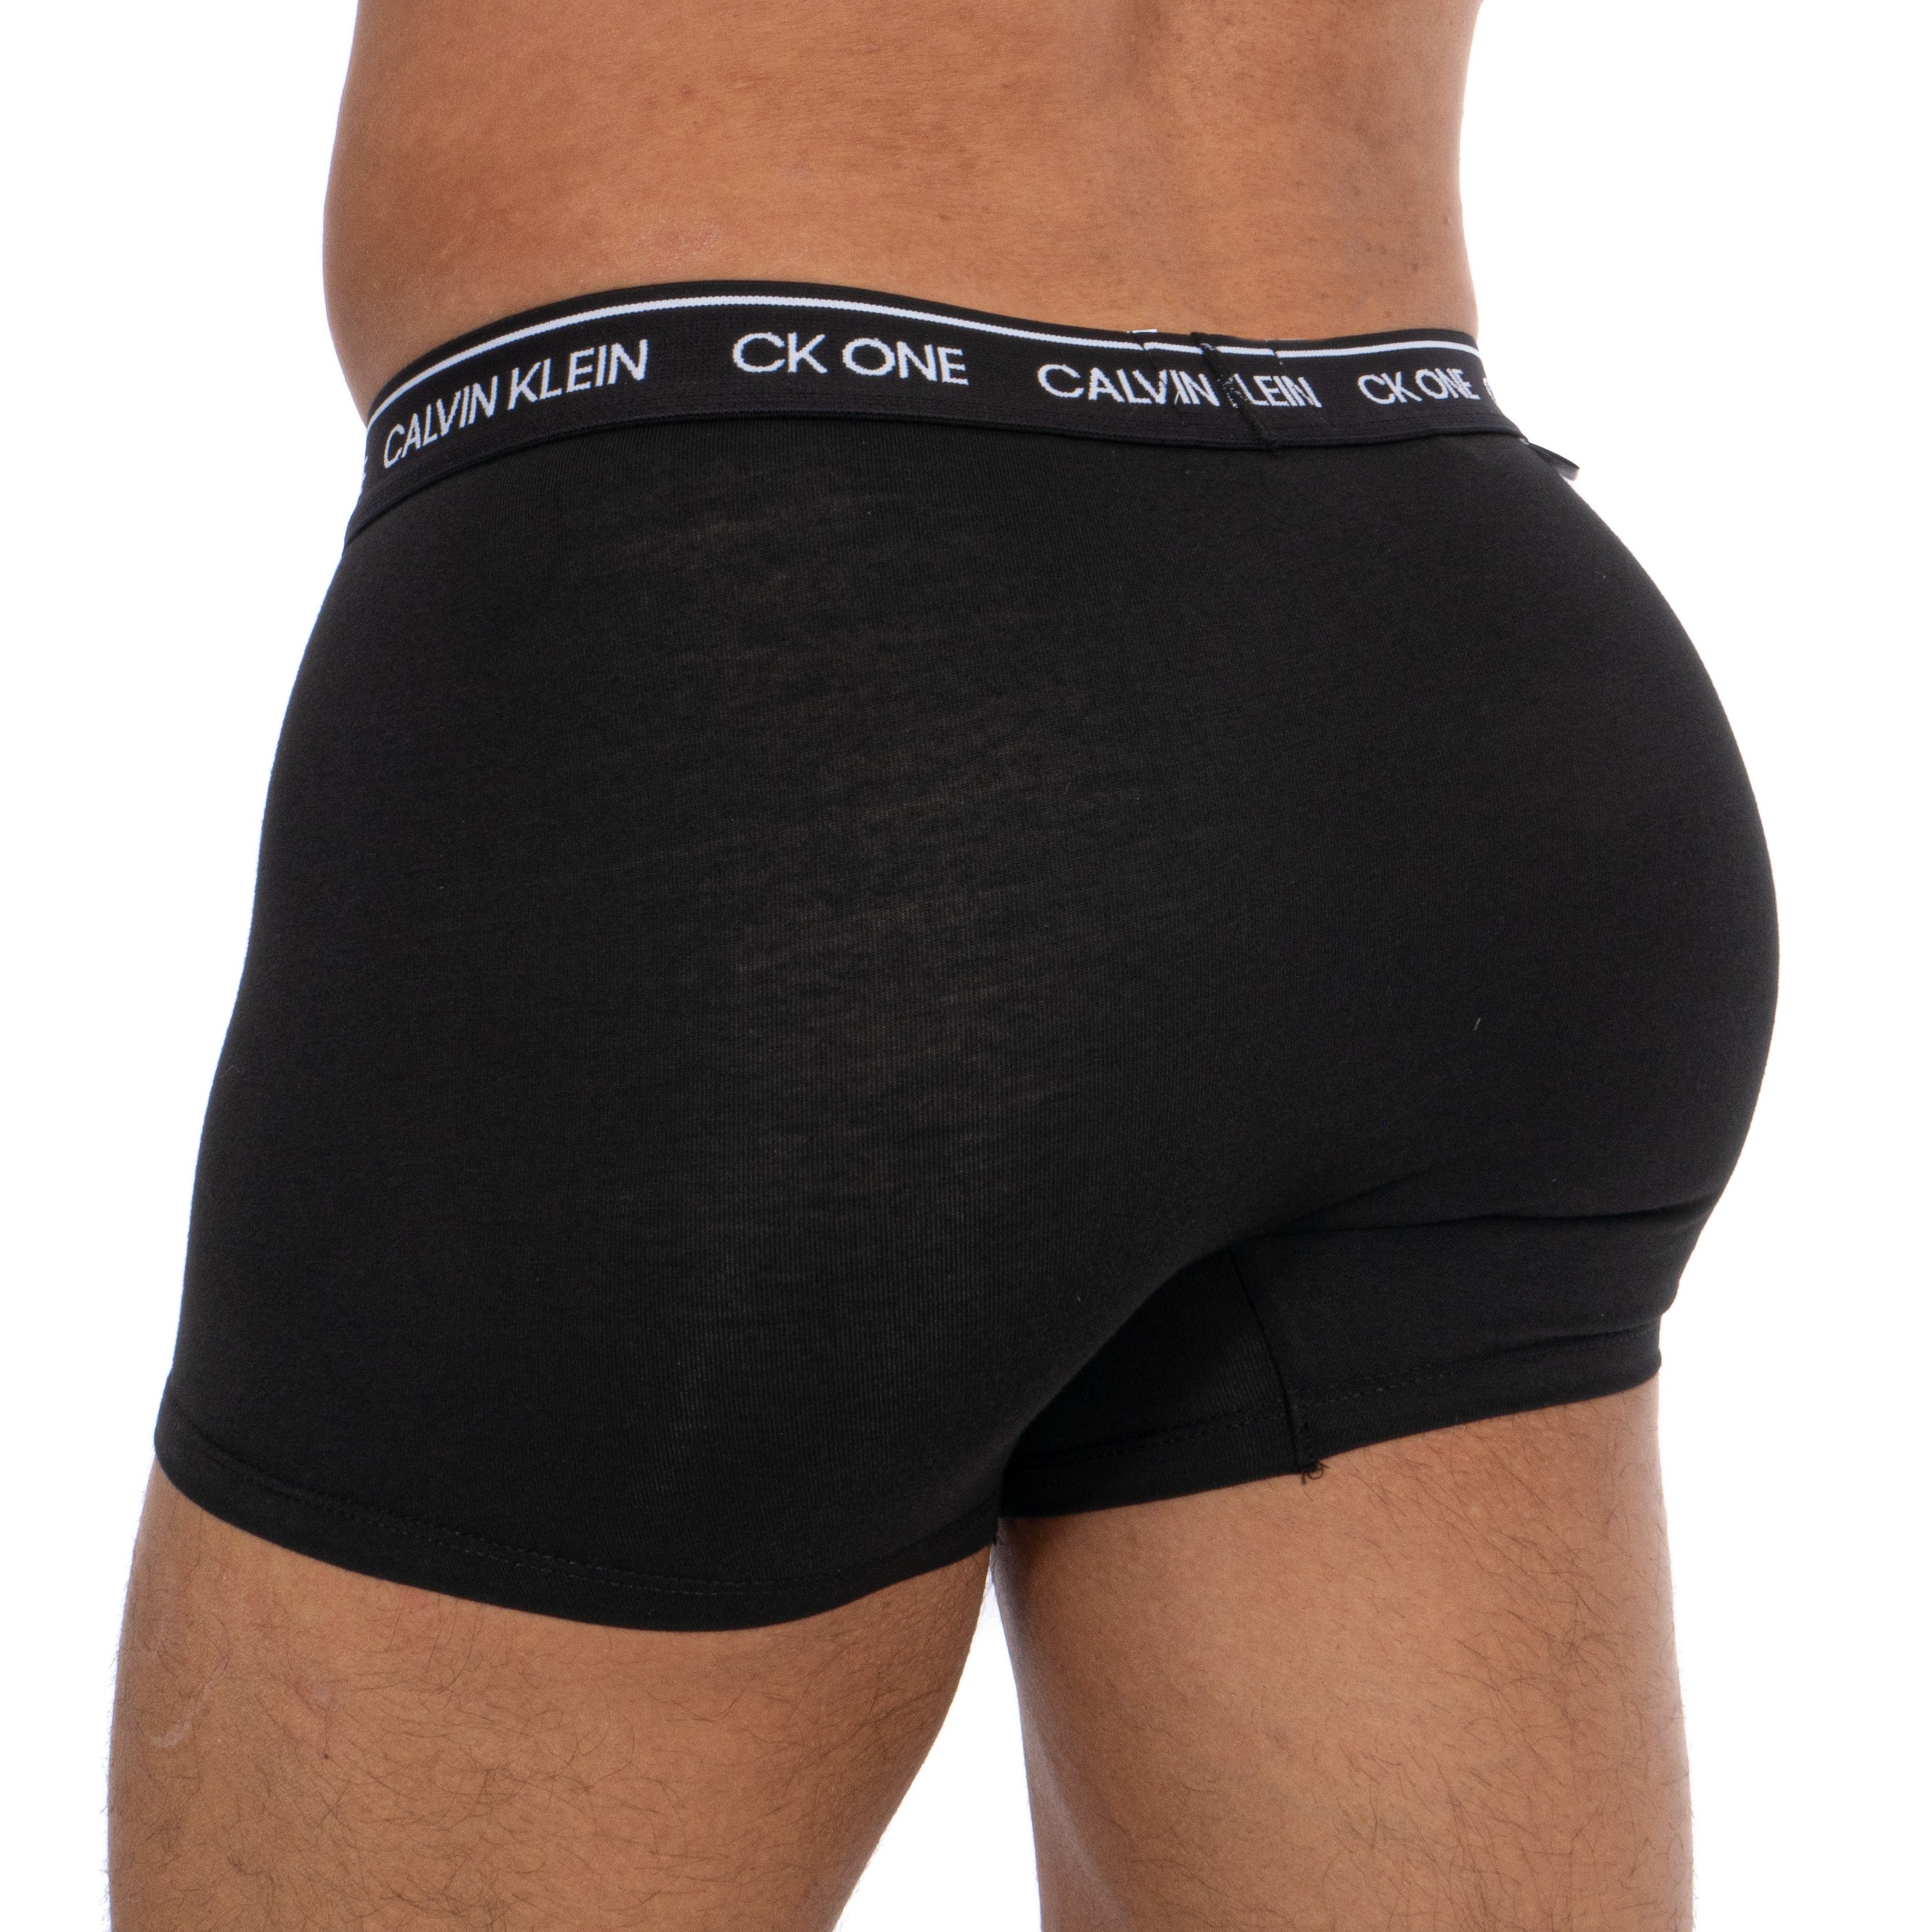 Boxer - CK ONE black: Boxers for man brand Calvin Klein for sale on